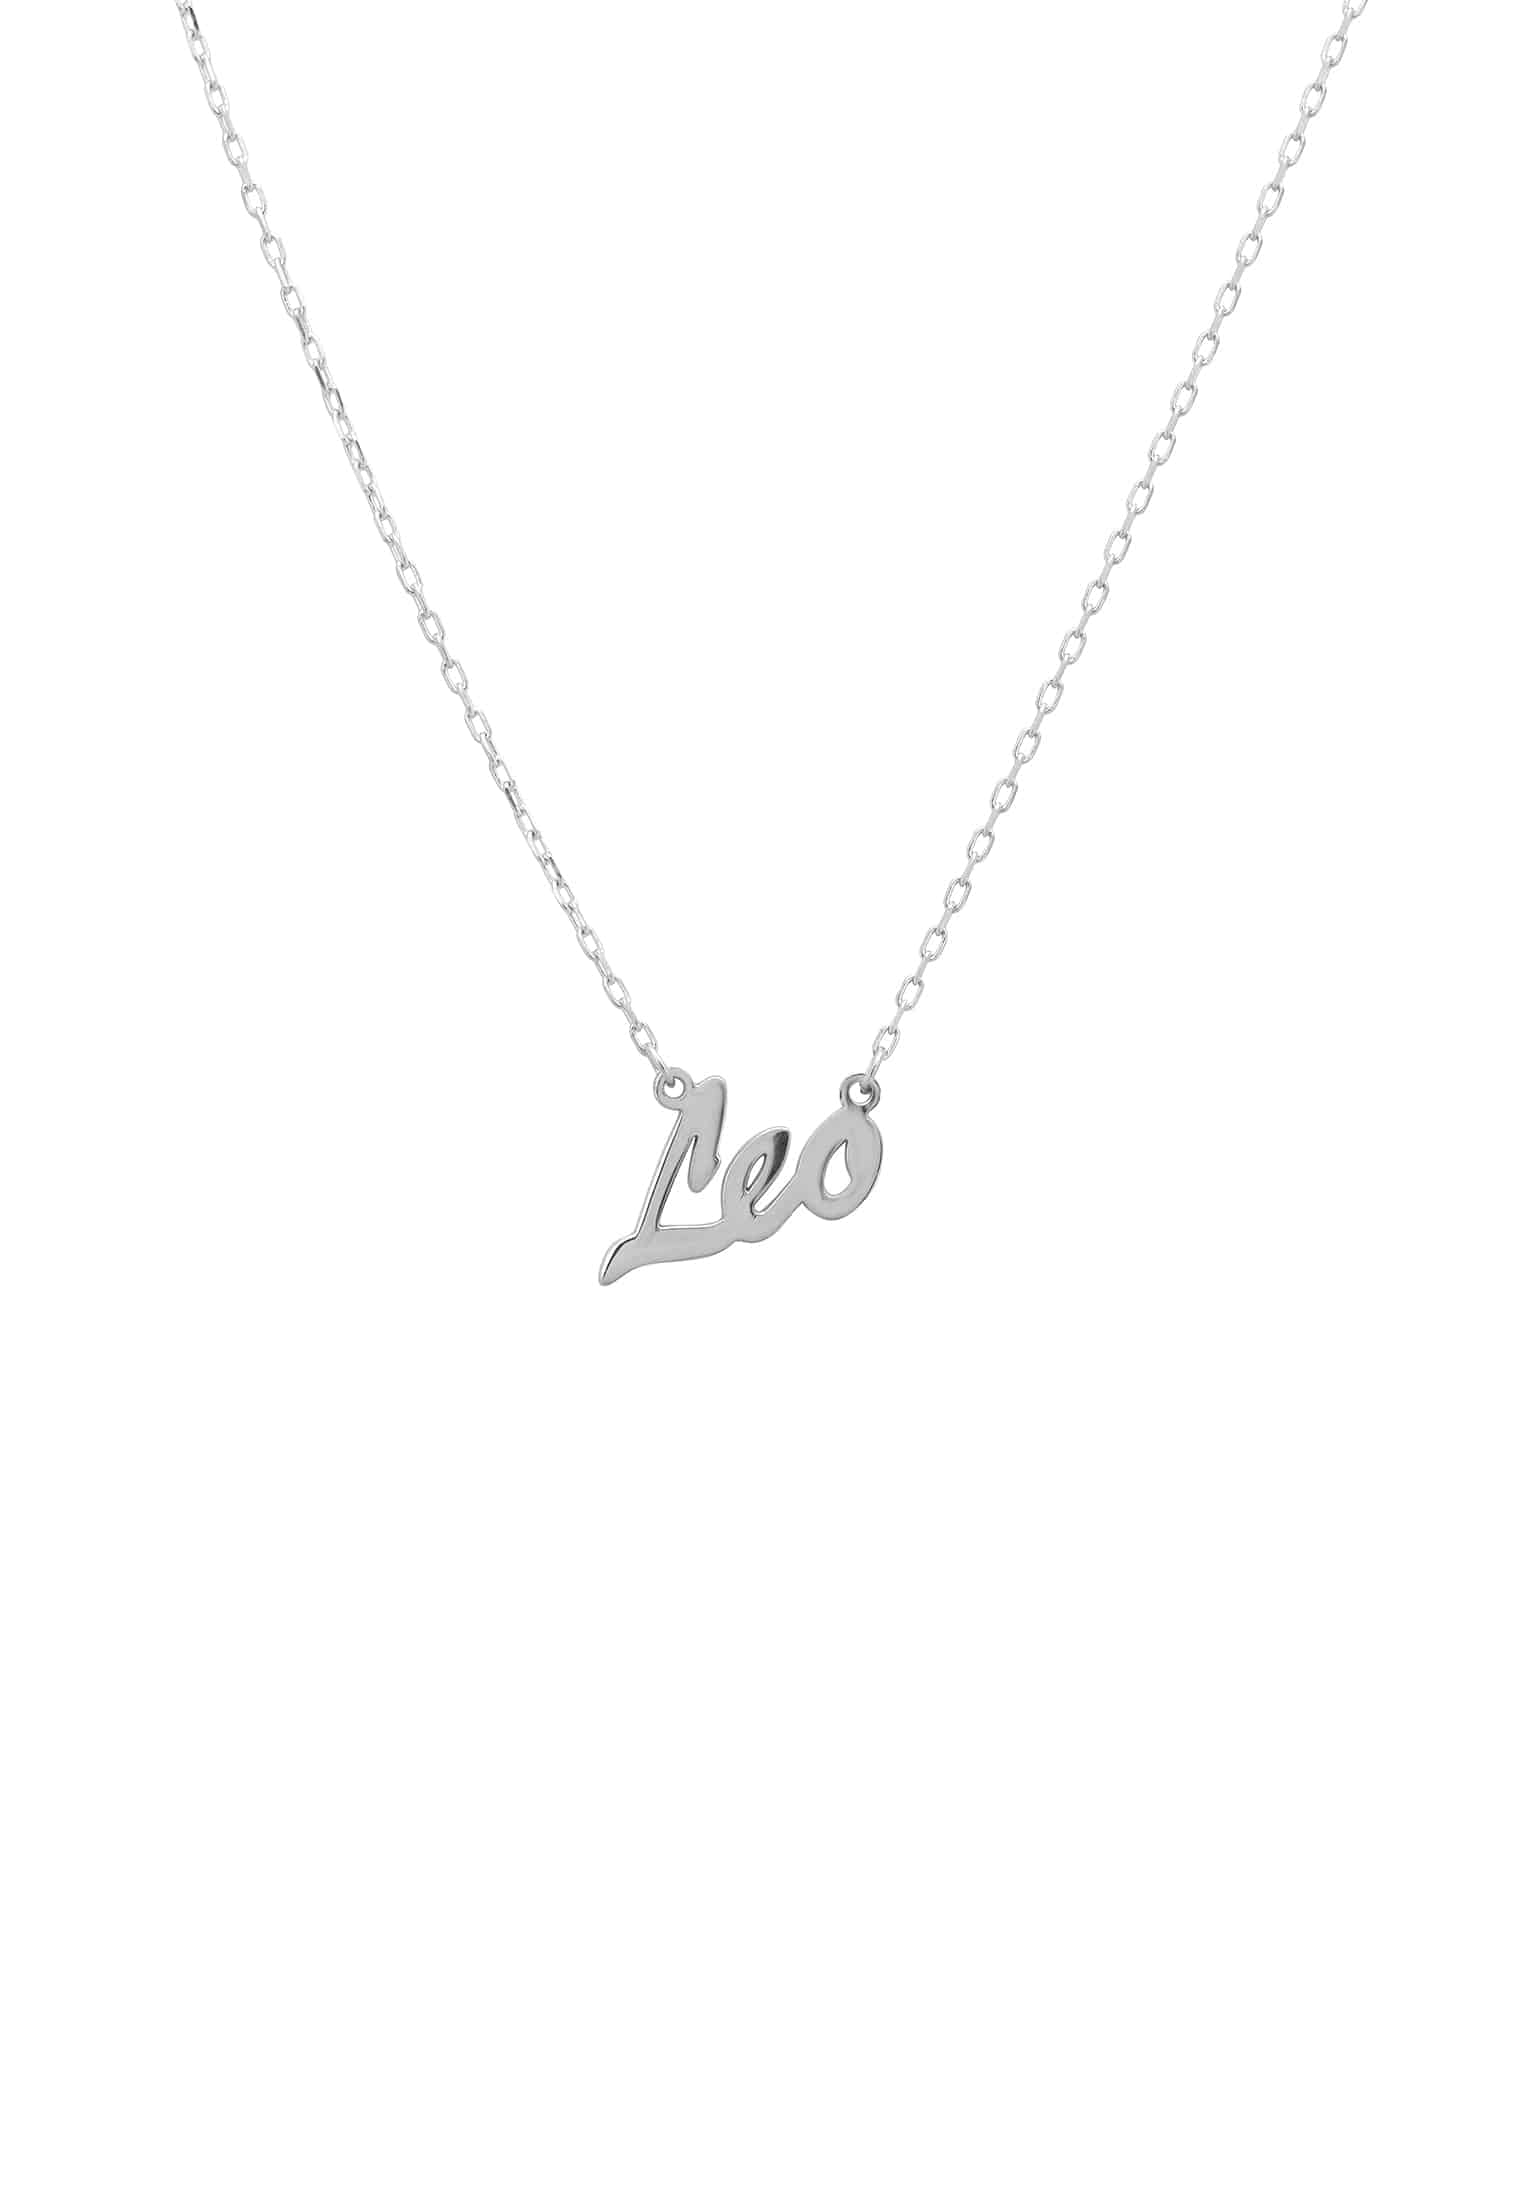 Leo Zodiac Name Necklace in Sterling Silver - Personalized Birthday Gift Idea - Jewelry & Watches - Bijou Her -  -  - 